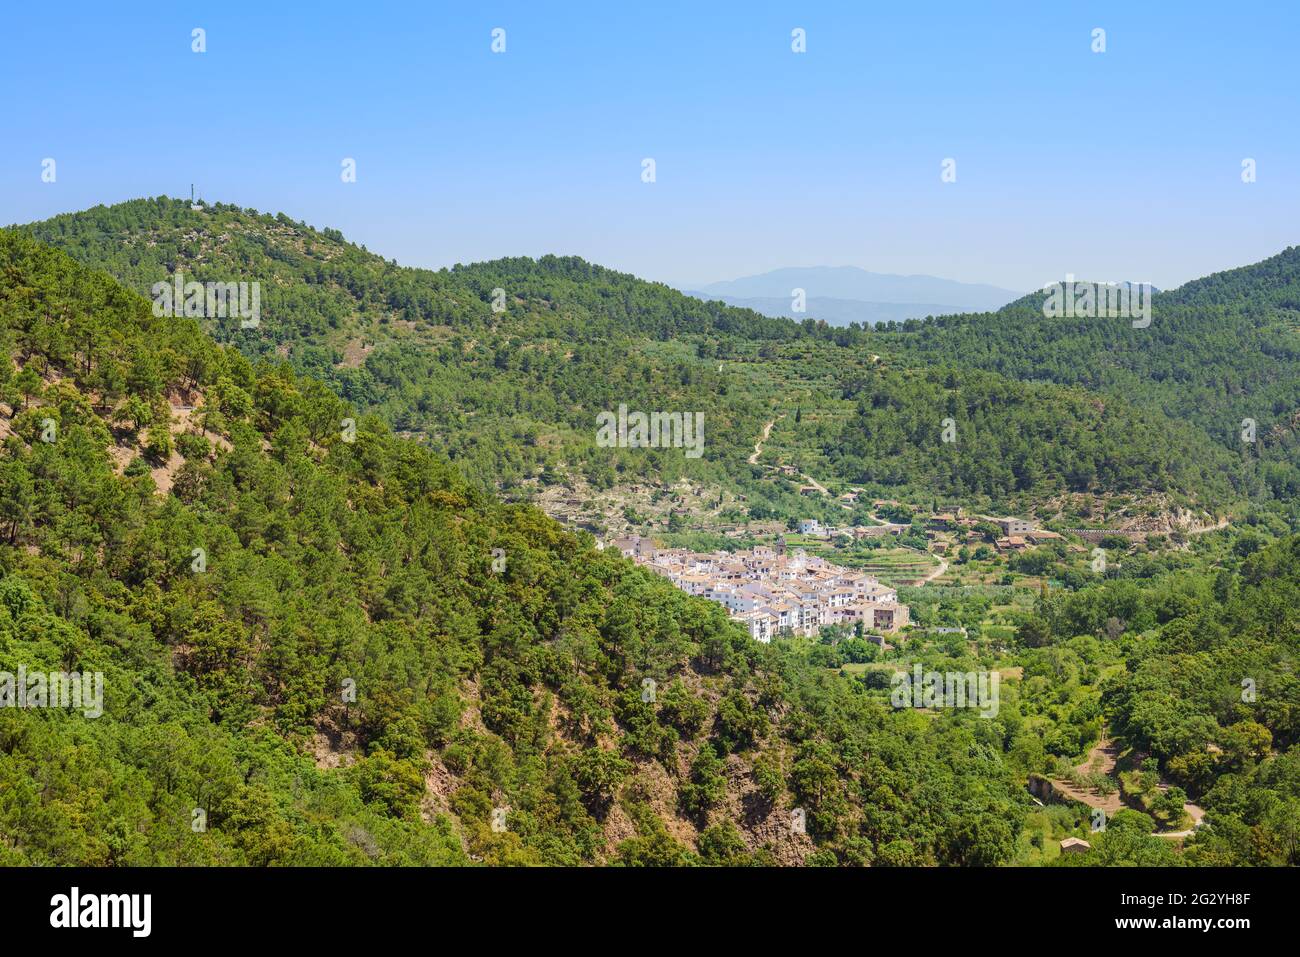 Picturesque white town in country side. Ain, Comunidad Valenciana, Spain Stock Photo